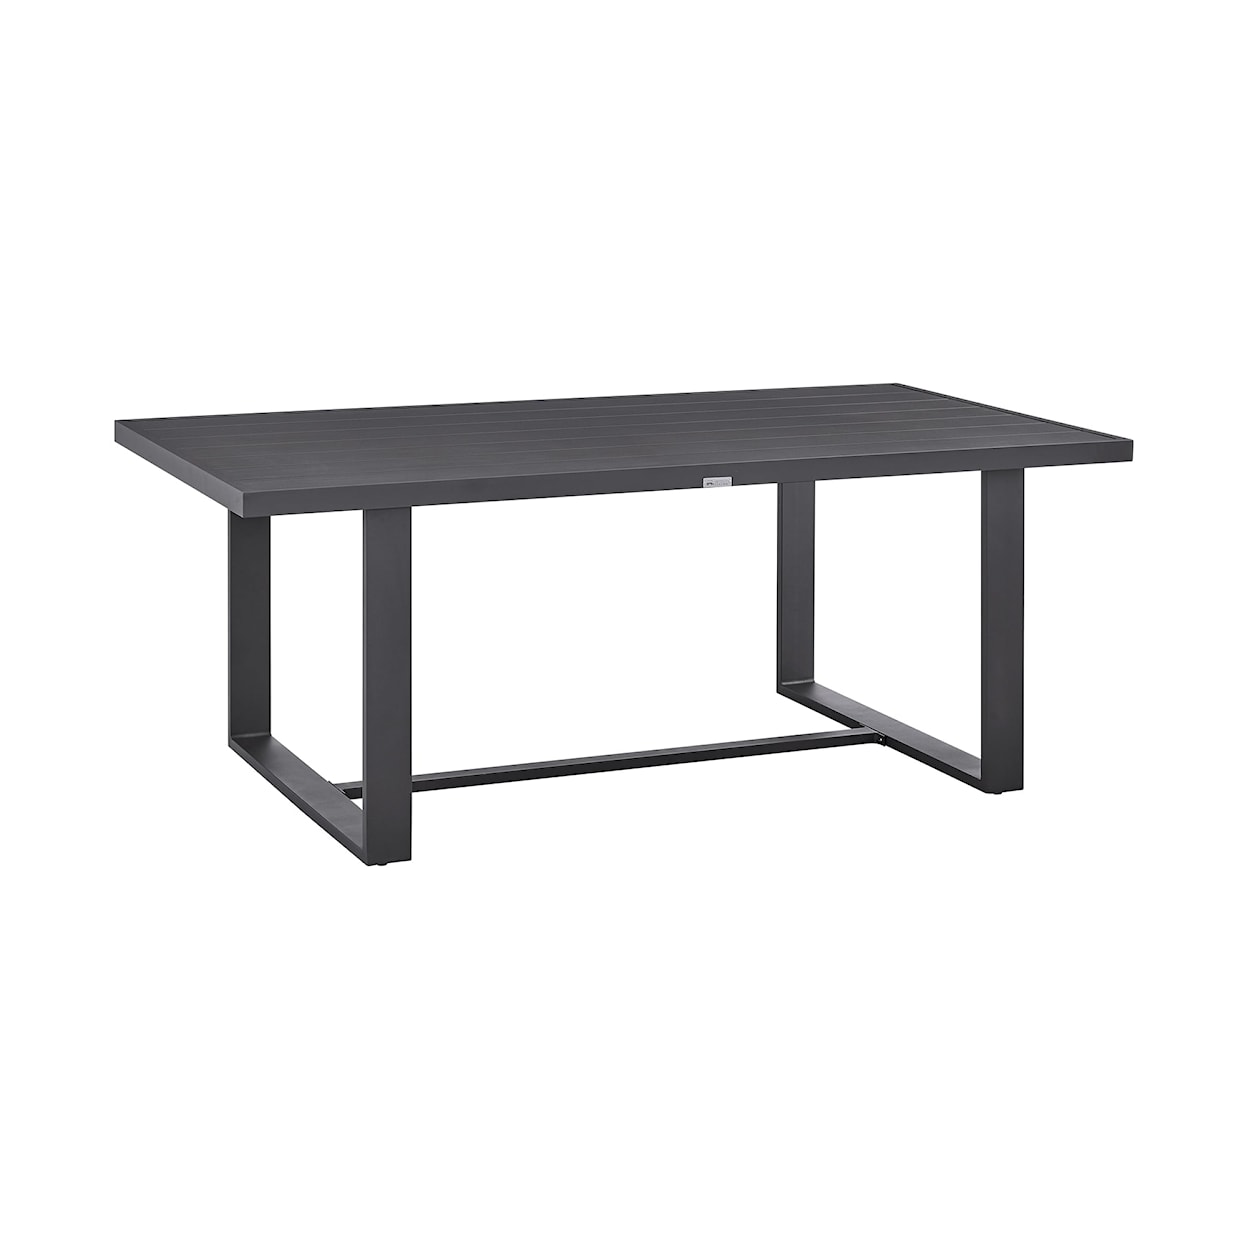 Armen Living Argiope Outdoor Dining Table